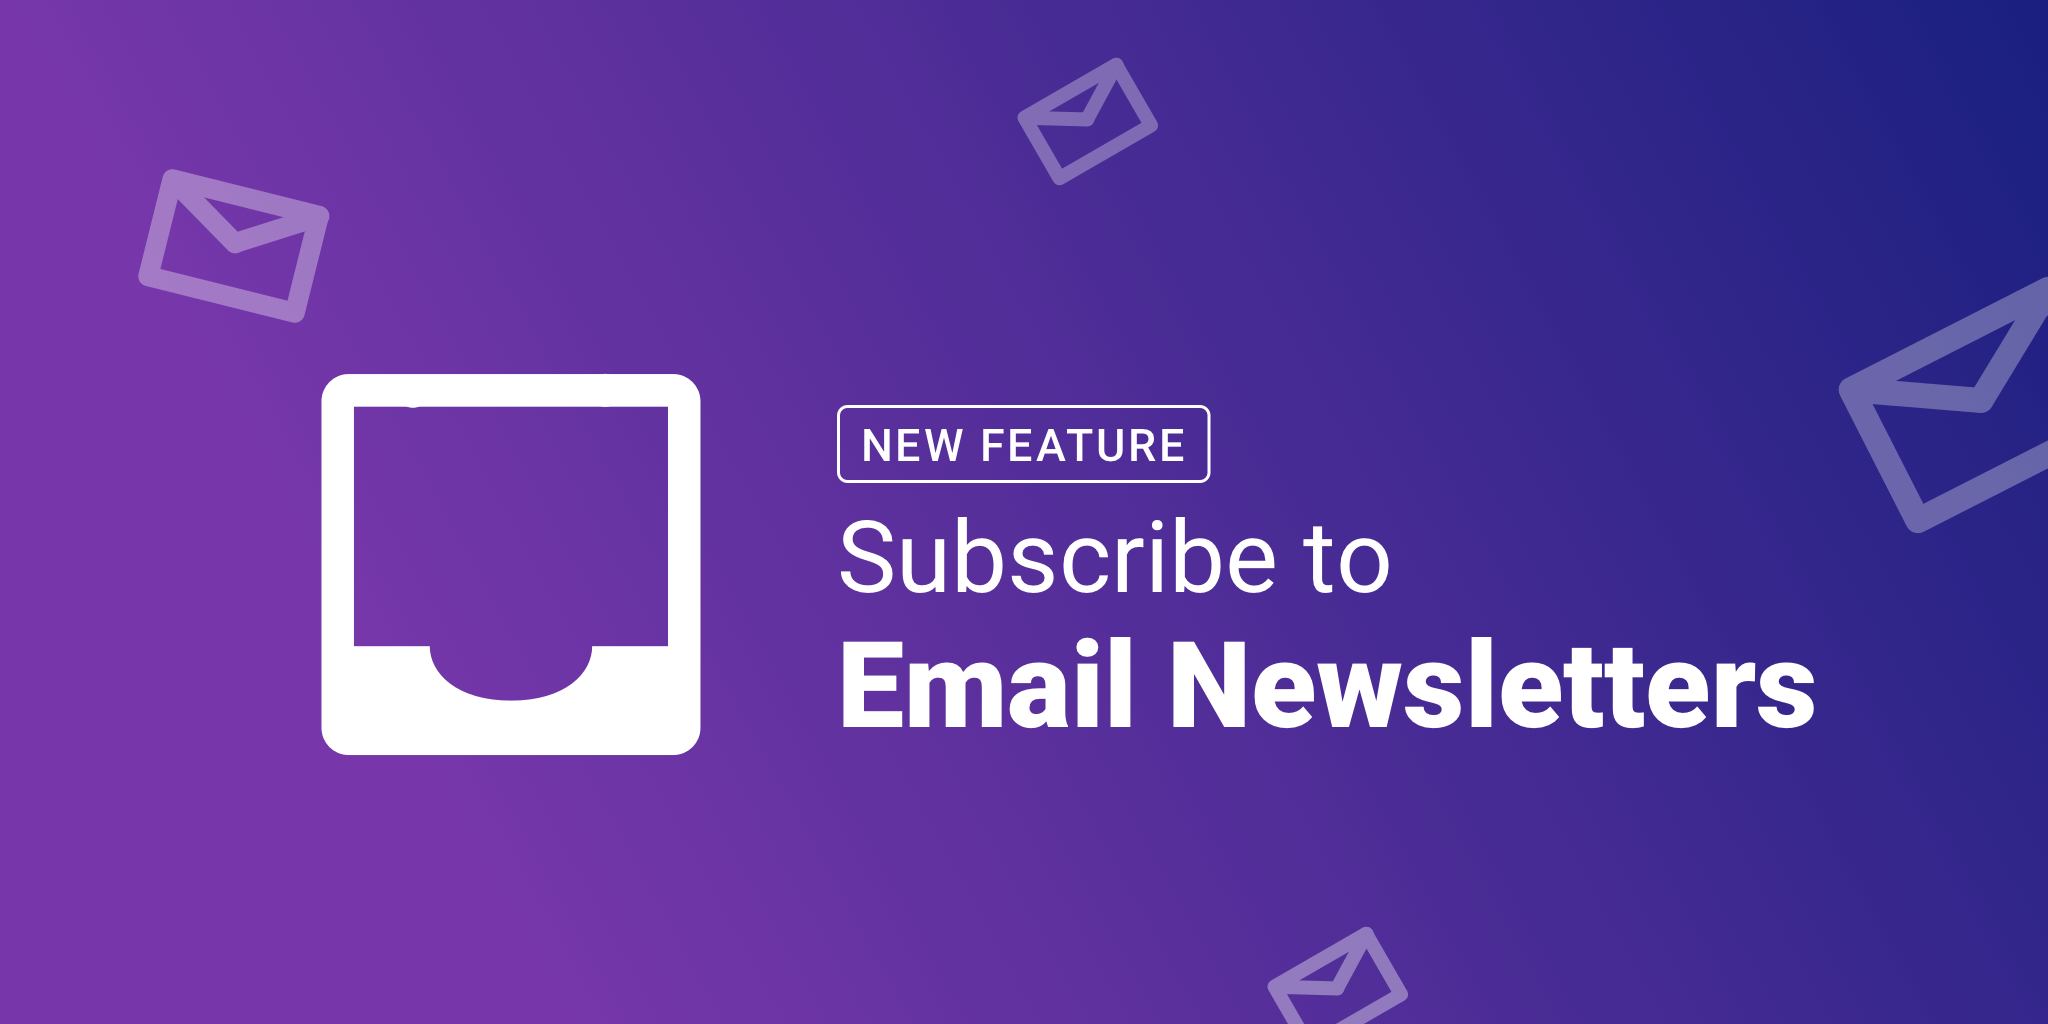 Declutter Your Inbox. Subscribe to Email Newsletters Straight Into